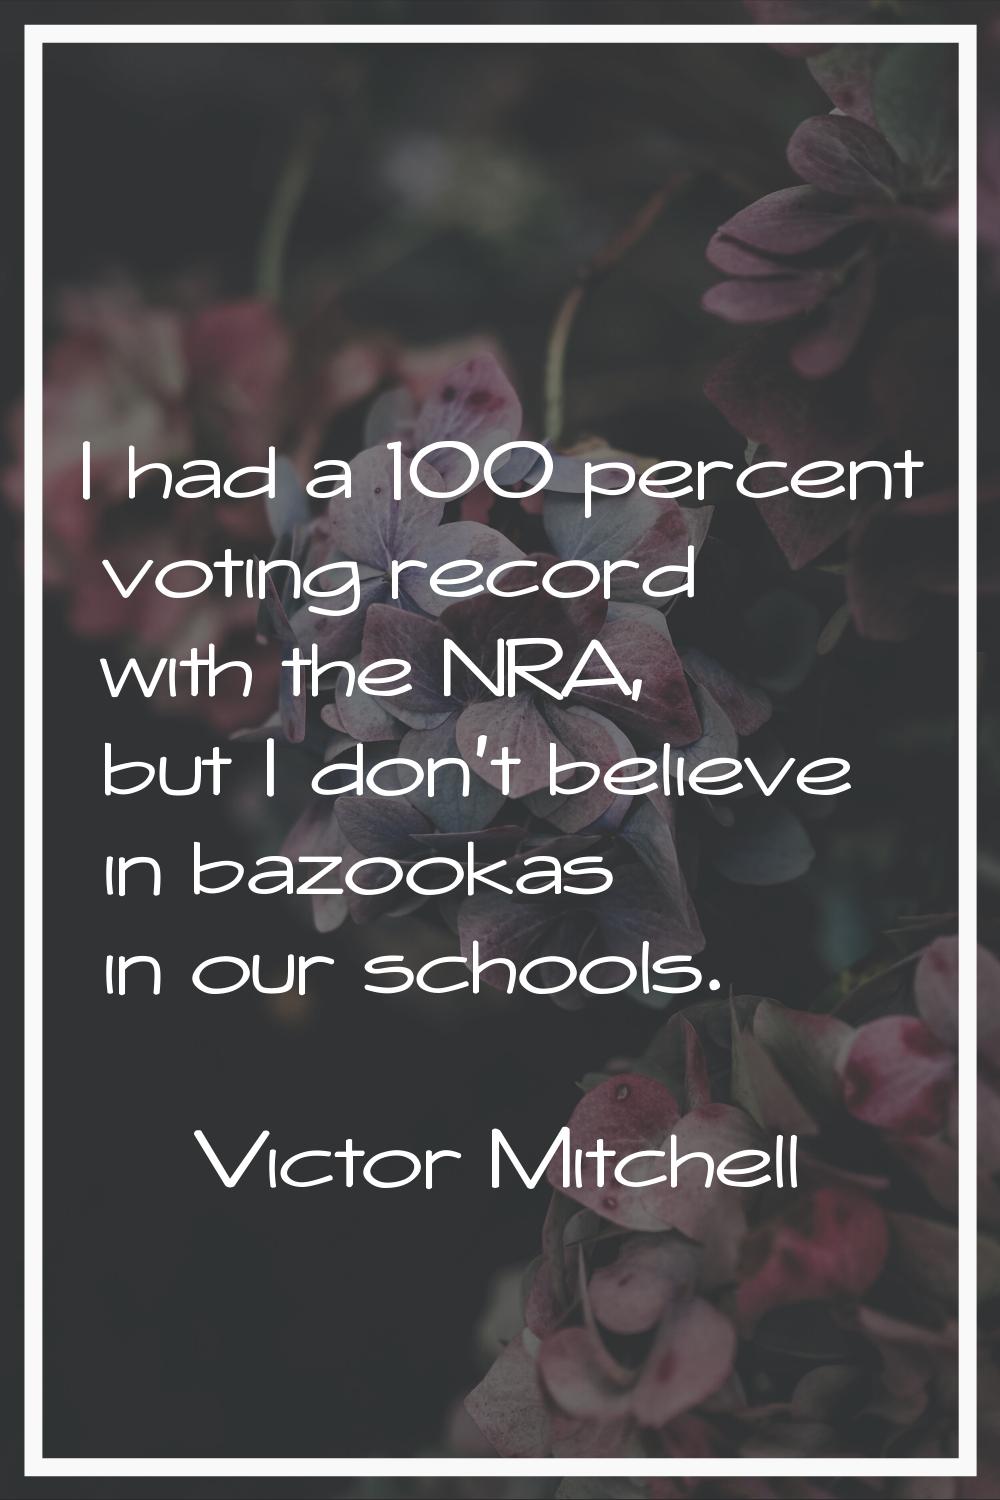 I had a 100 percent voting record with the NRA, but I don't believe in bazookas in our schools.